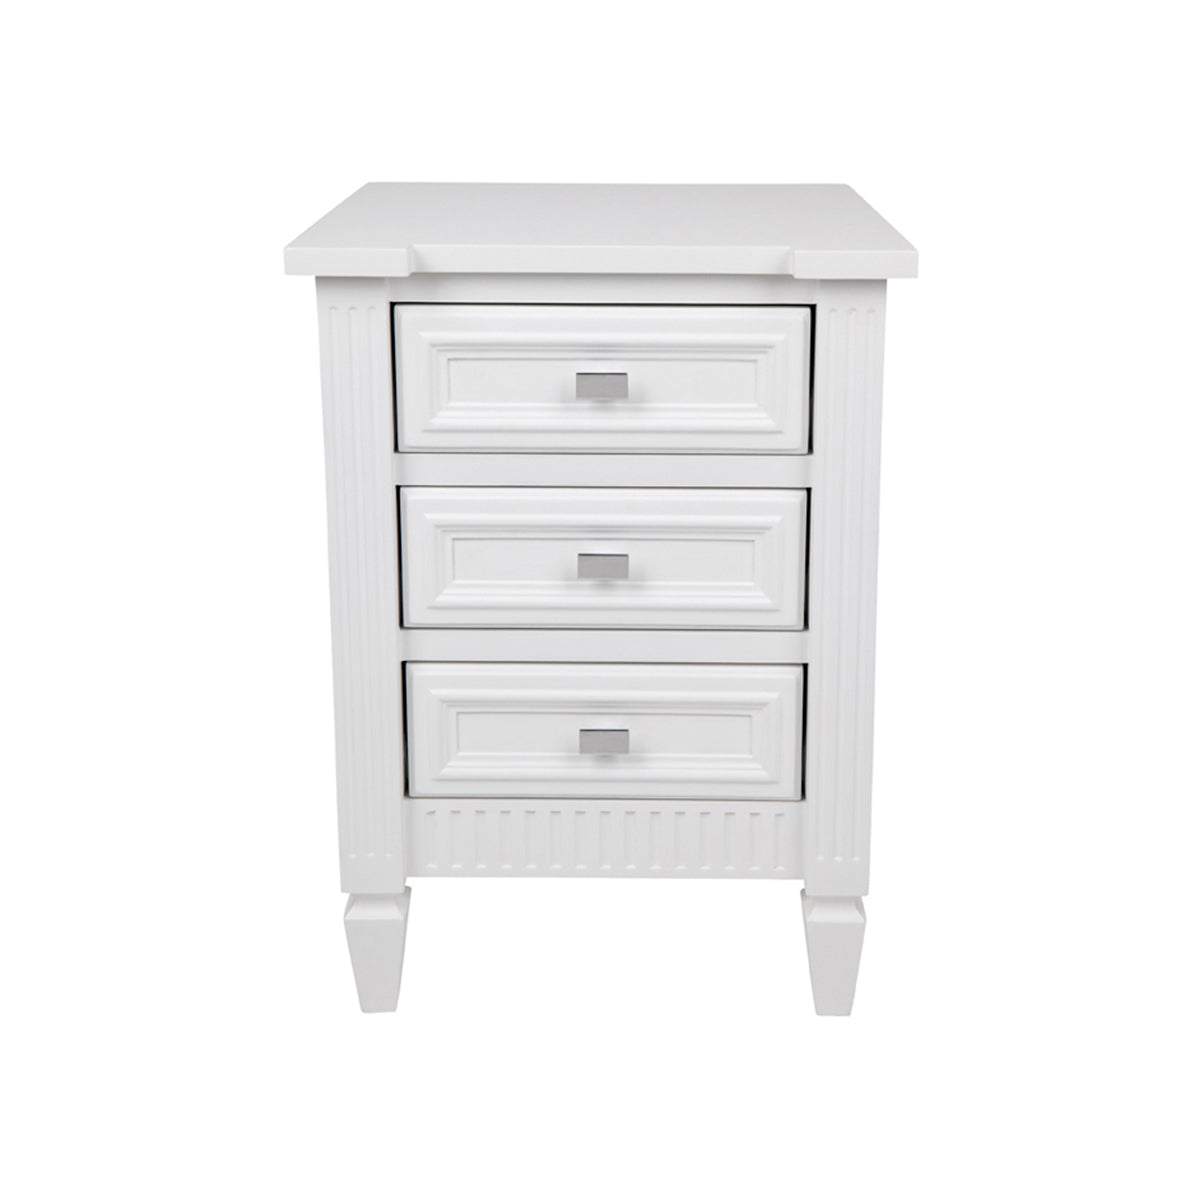 Merci Bedside Table - Small White